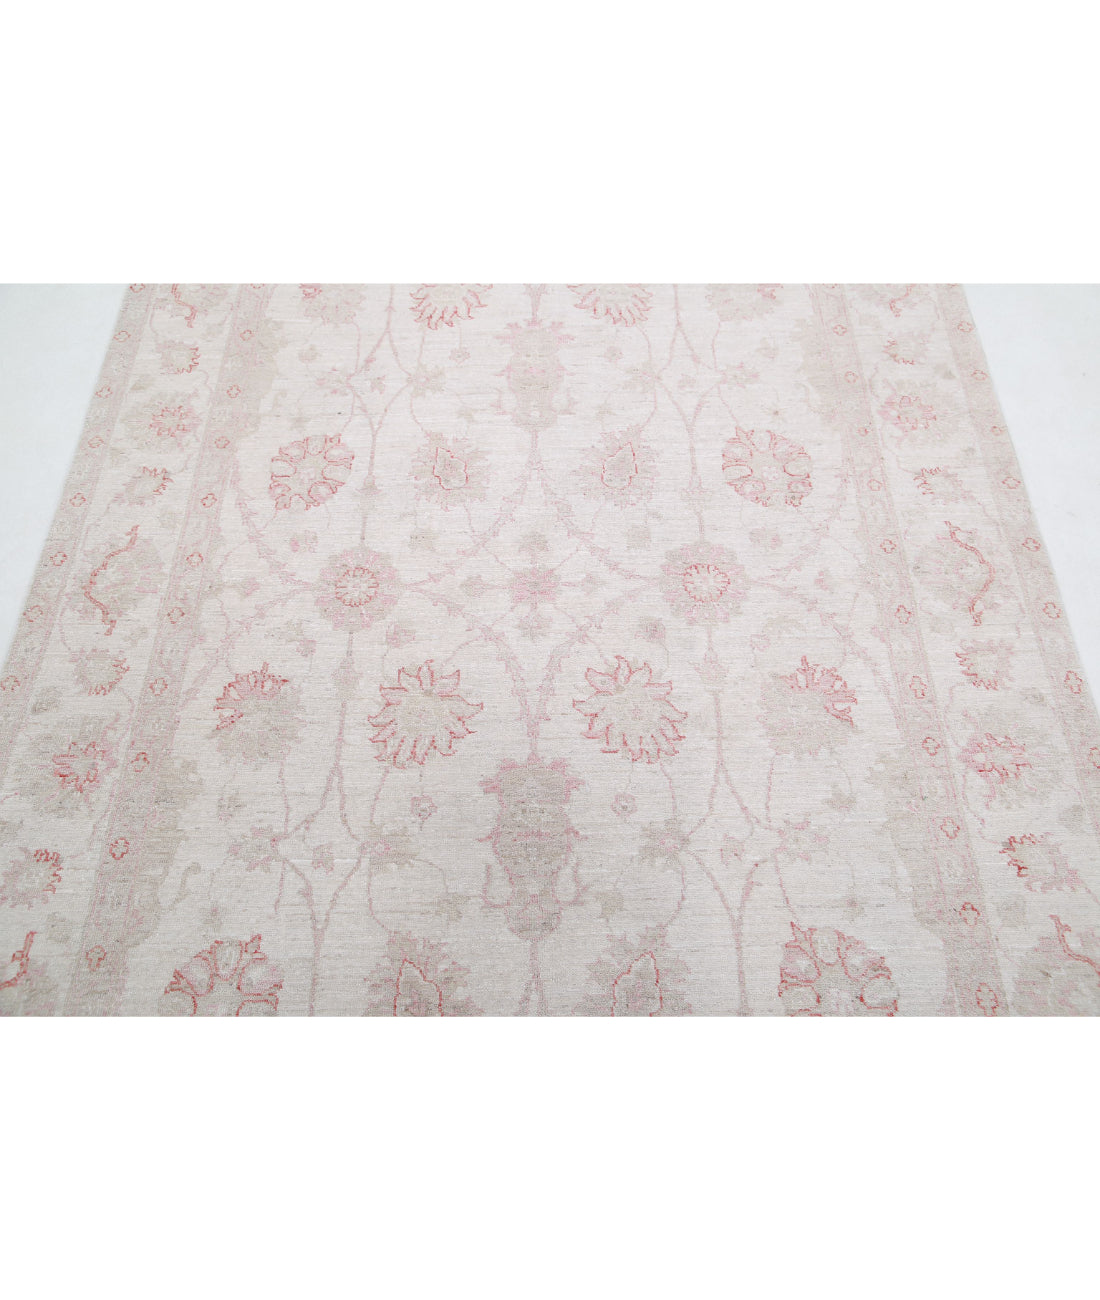 Hand Knotted Serenity Wool Rug - 5'4'' x 7'7'' 5'4'' x 7'7'' (160 X 228) / Ivory / Ivory